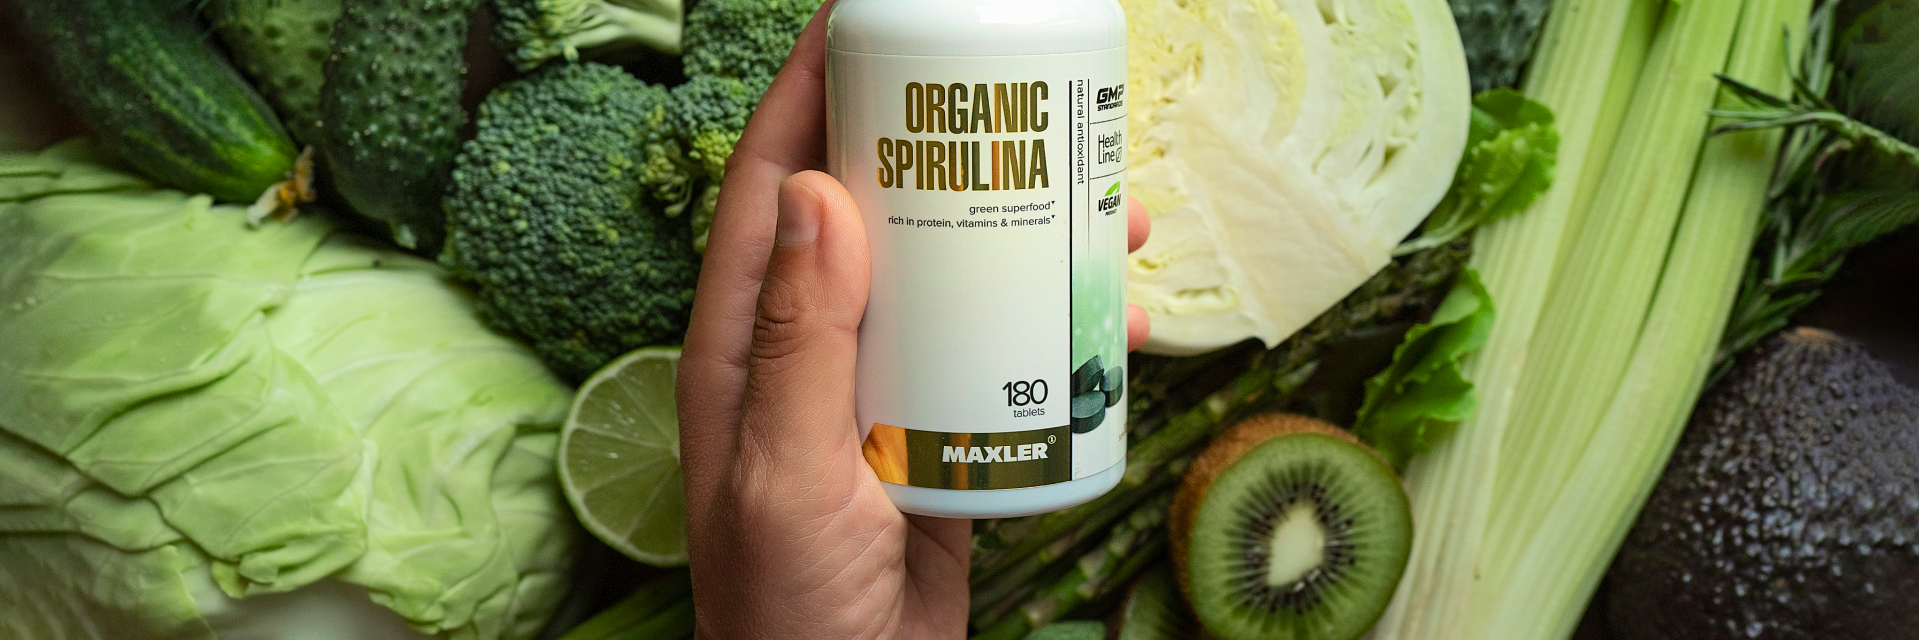 A photo of a hand holding a bottle of Organic Spirulina.